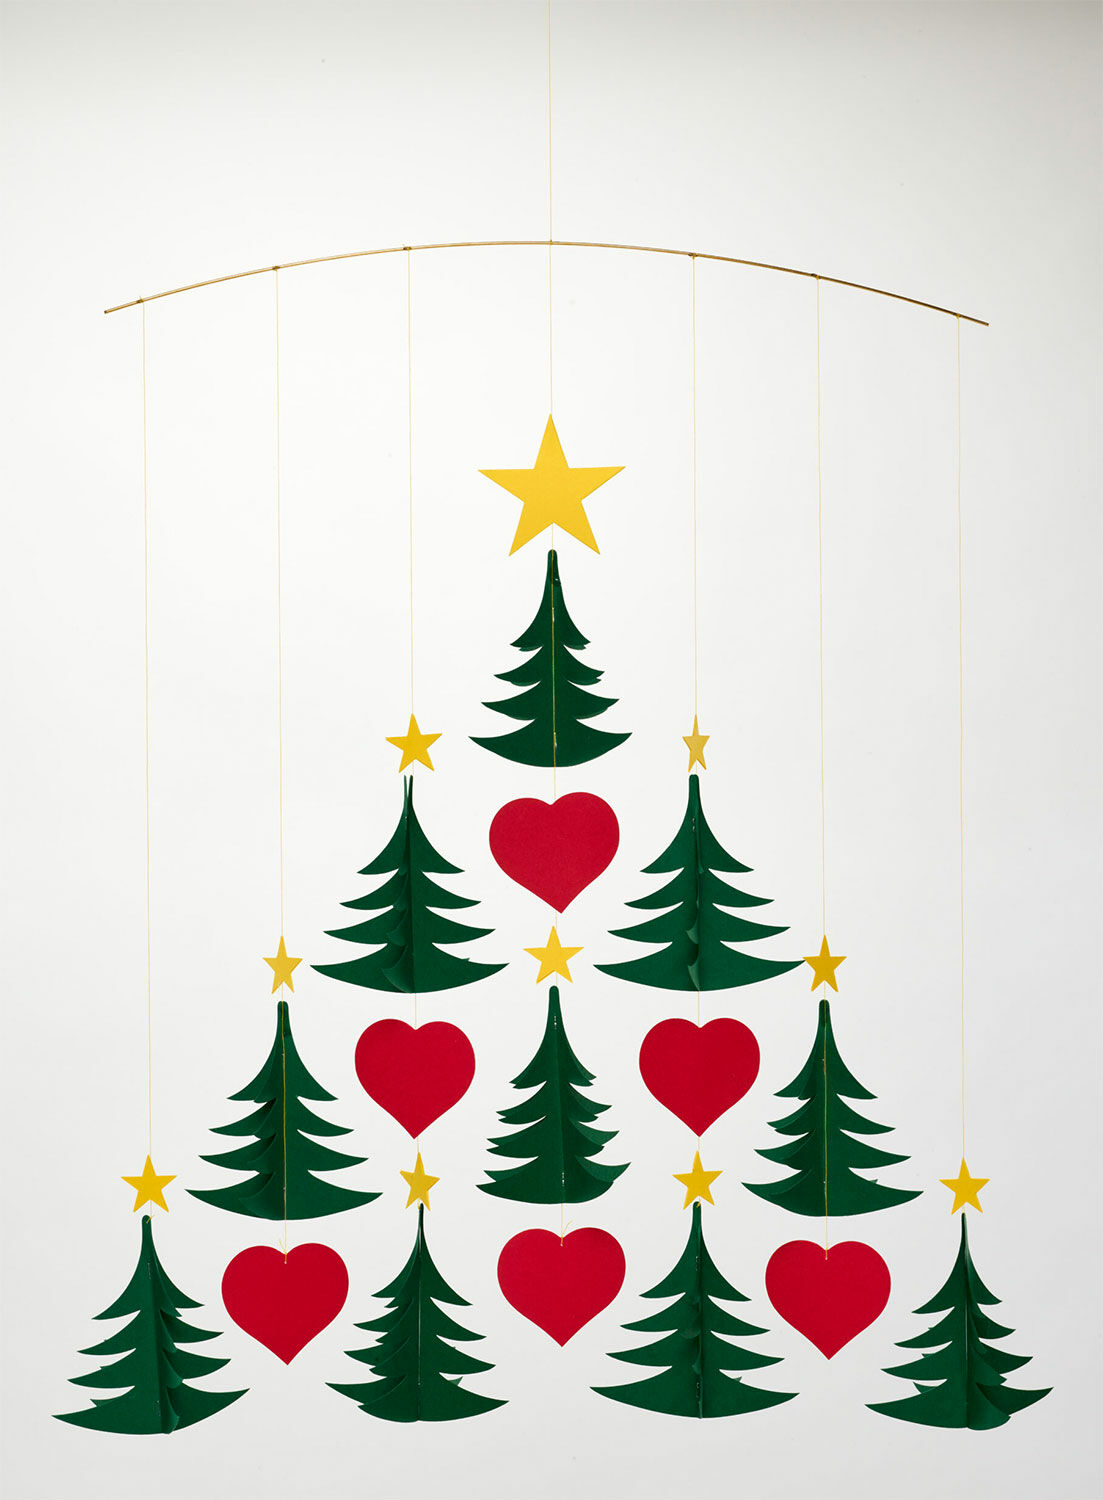 Ceiling mobile "Christmas Trees" by Flensted Mobilés